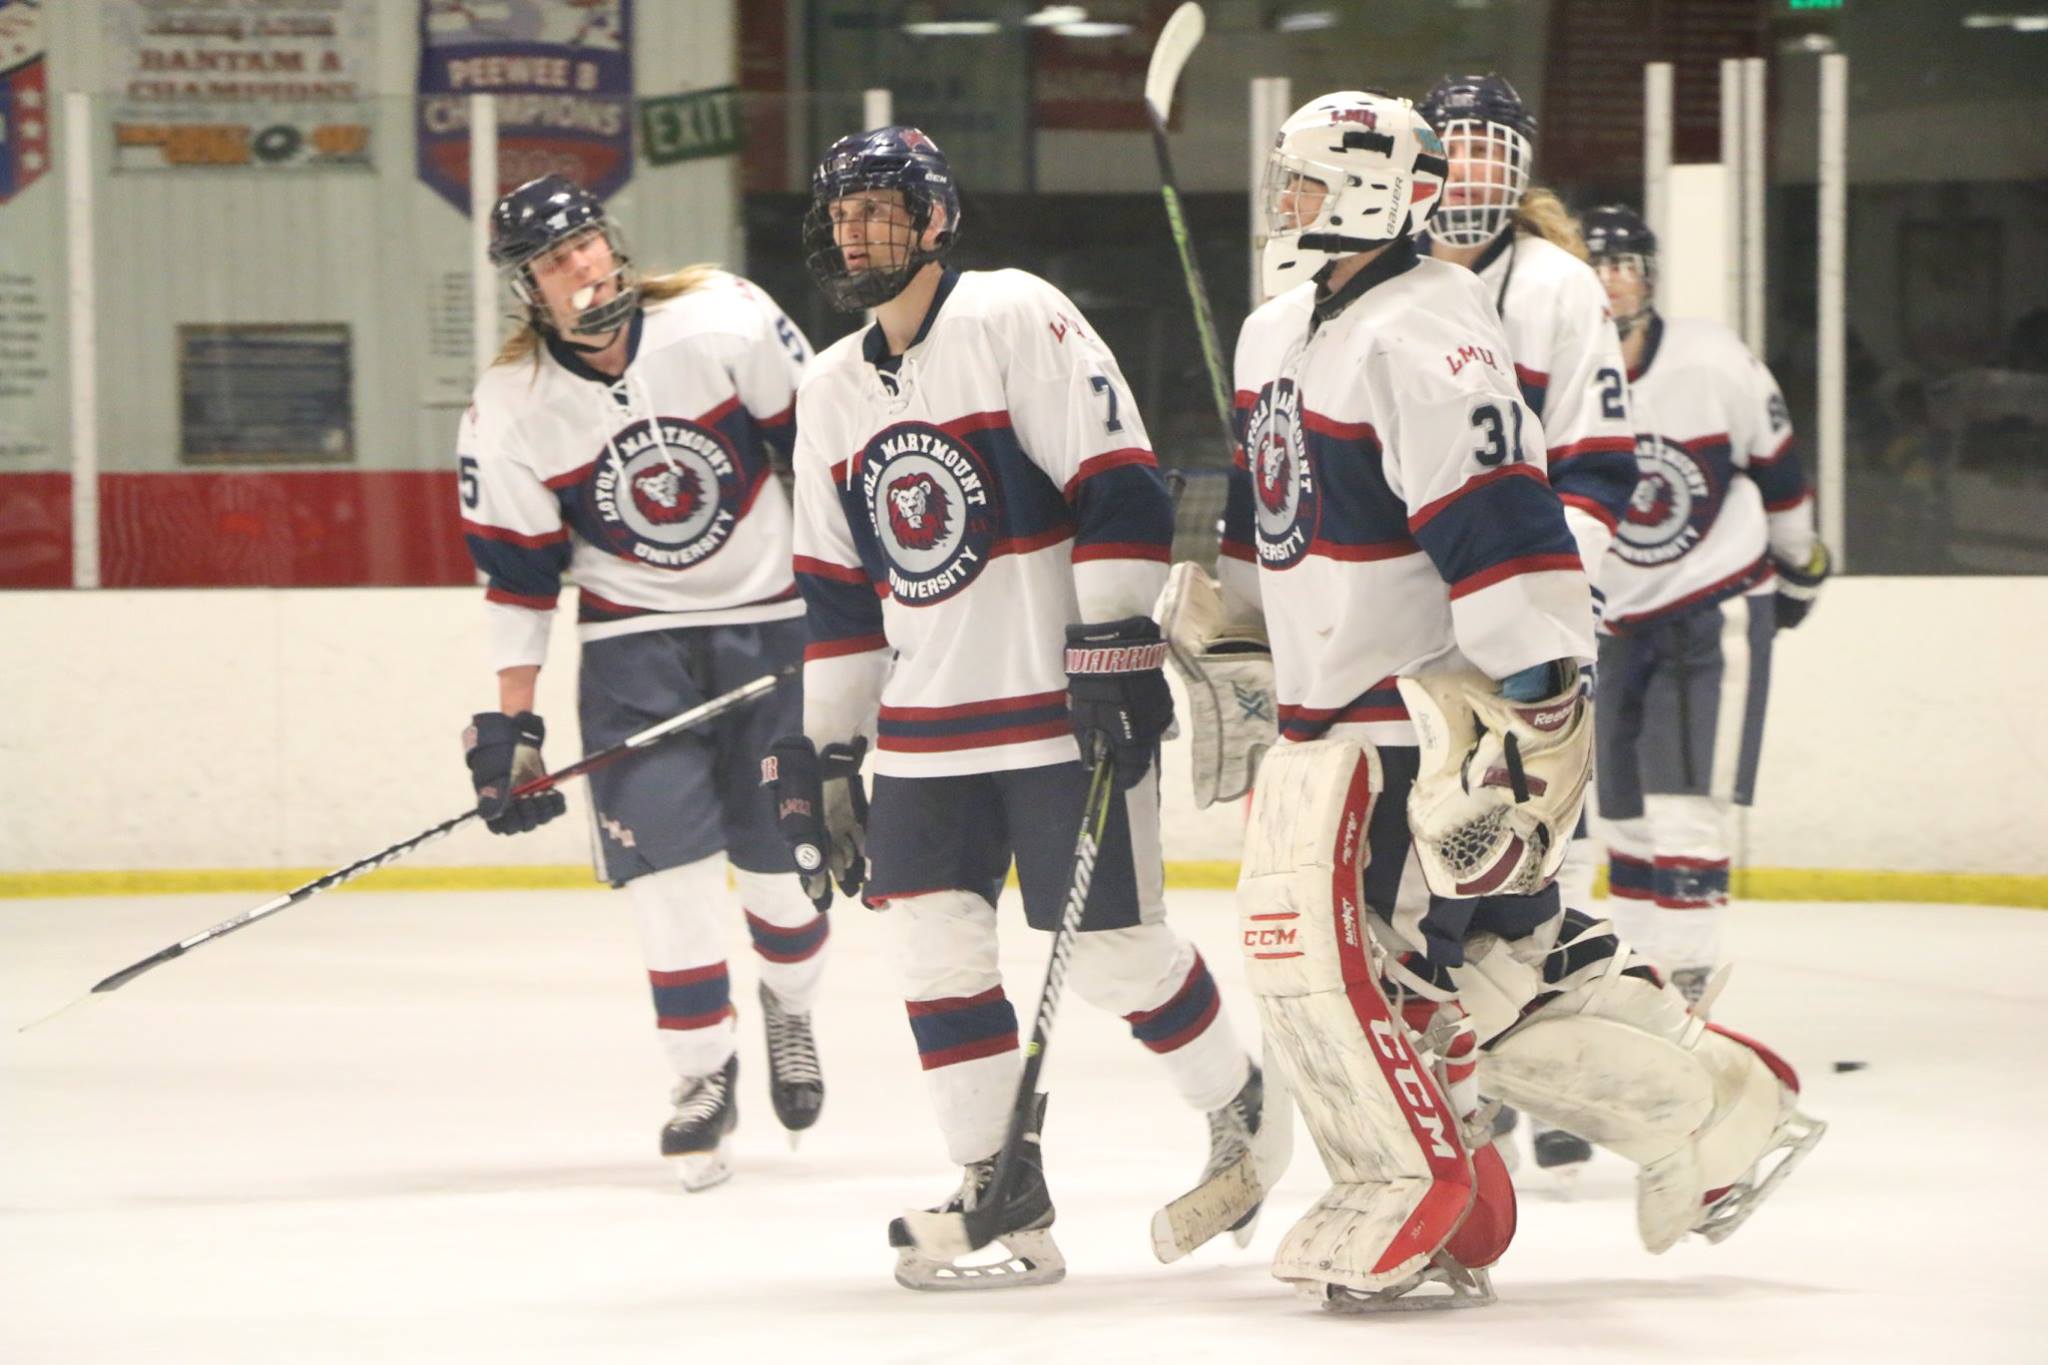 LMU Ice Hockey Club Sports1 - Building Legacy and Tradition On and Off the Ice